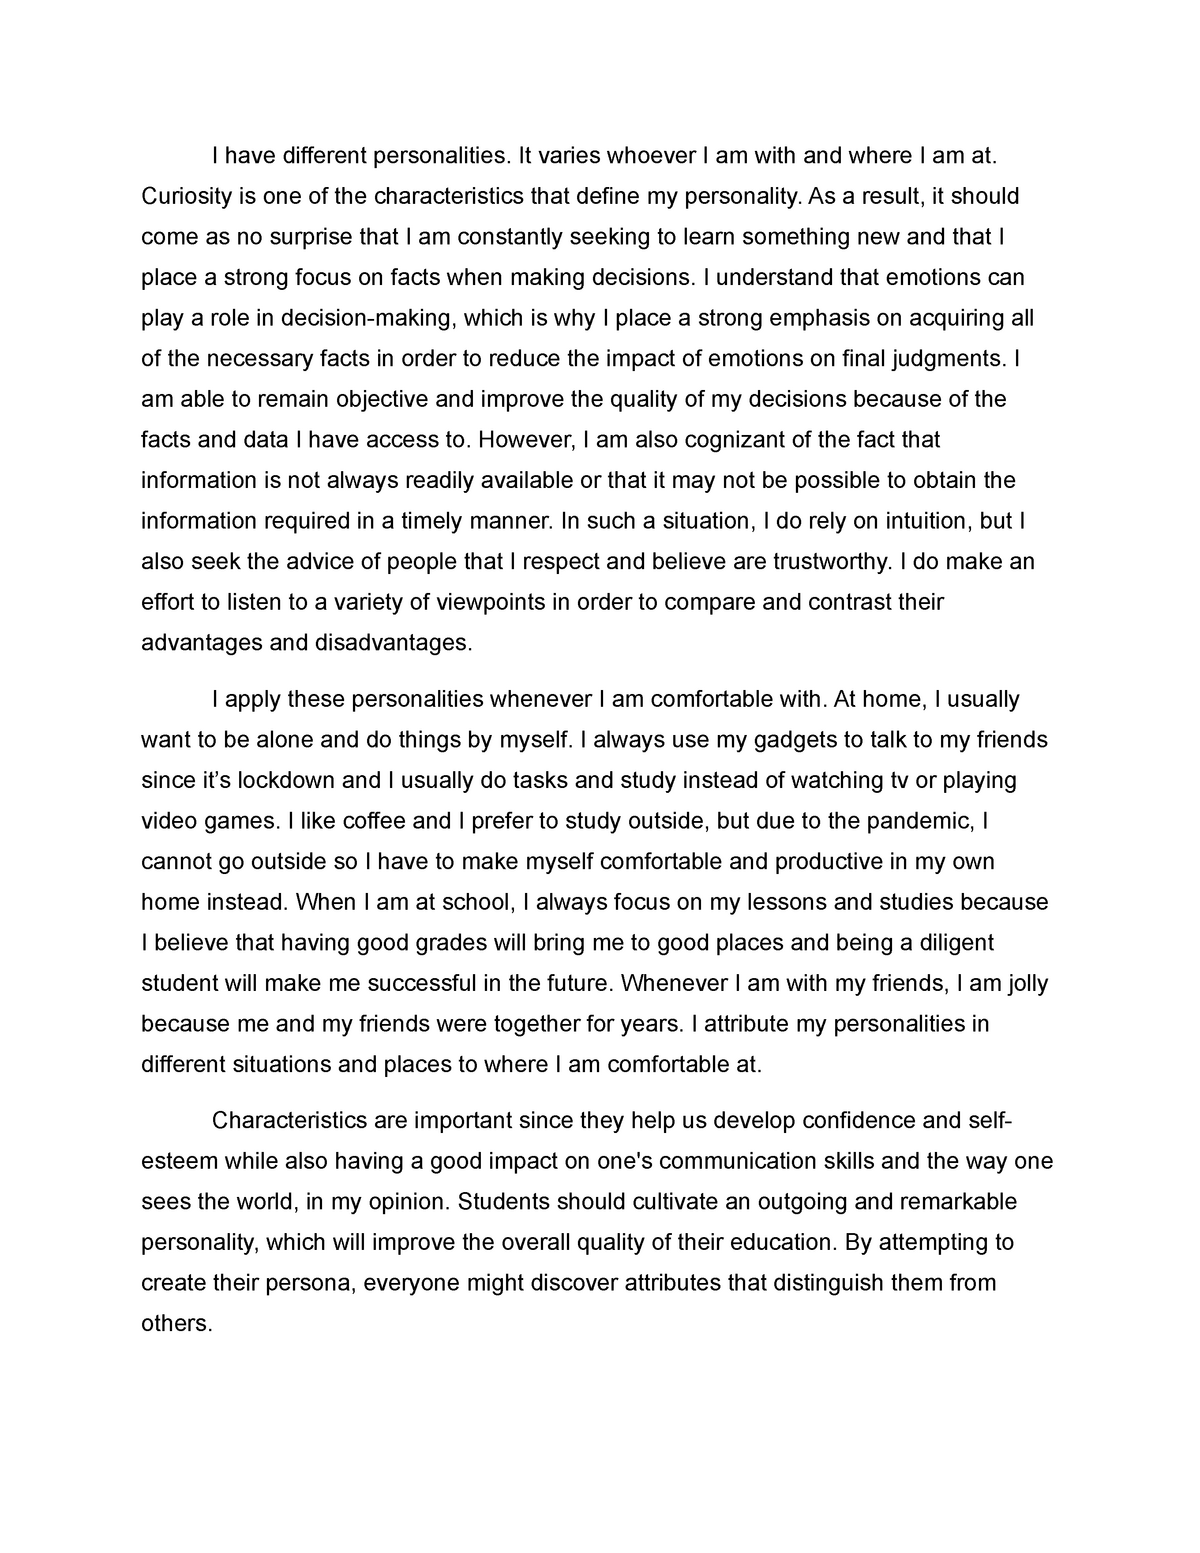 essay about different personalities